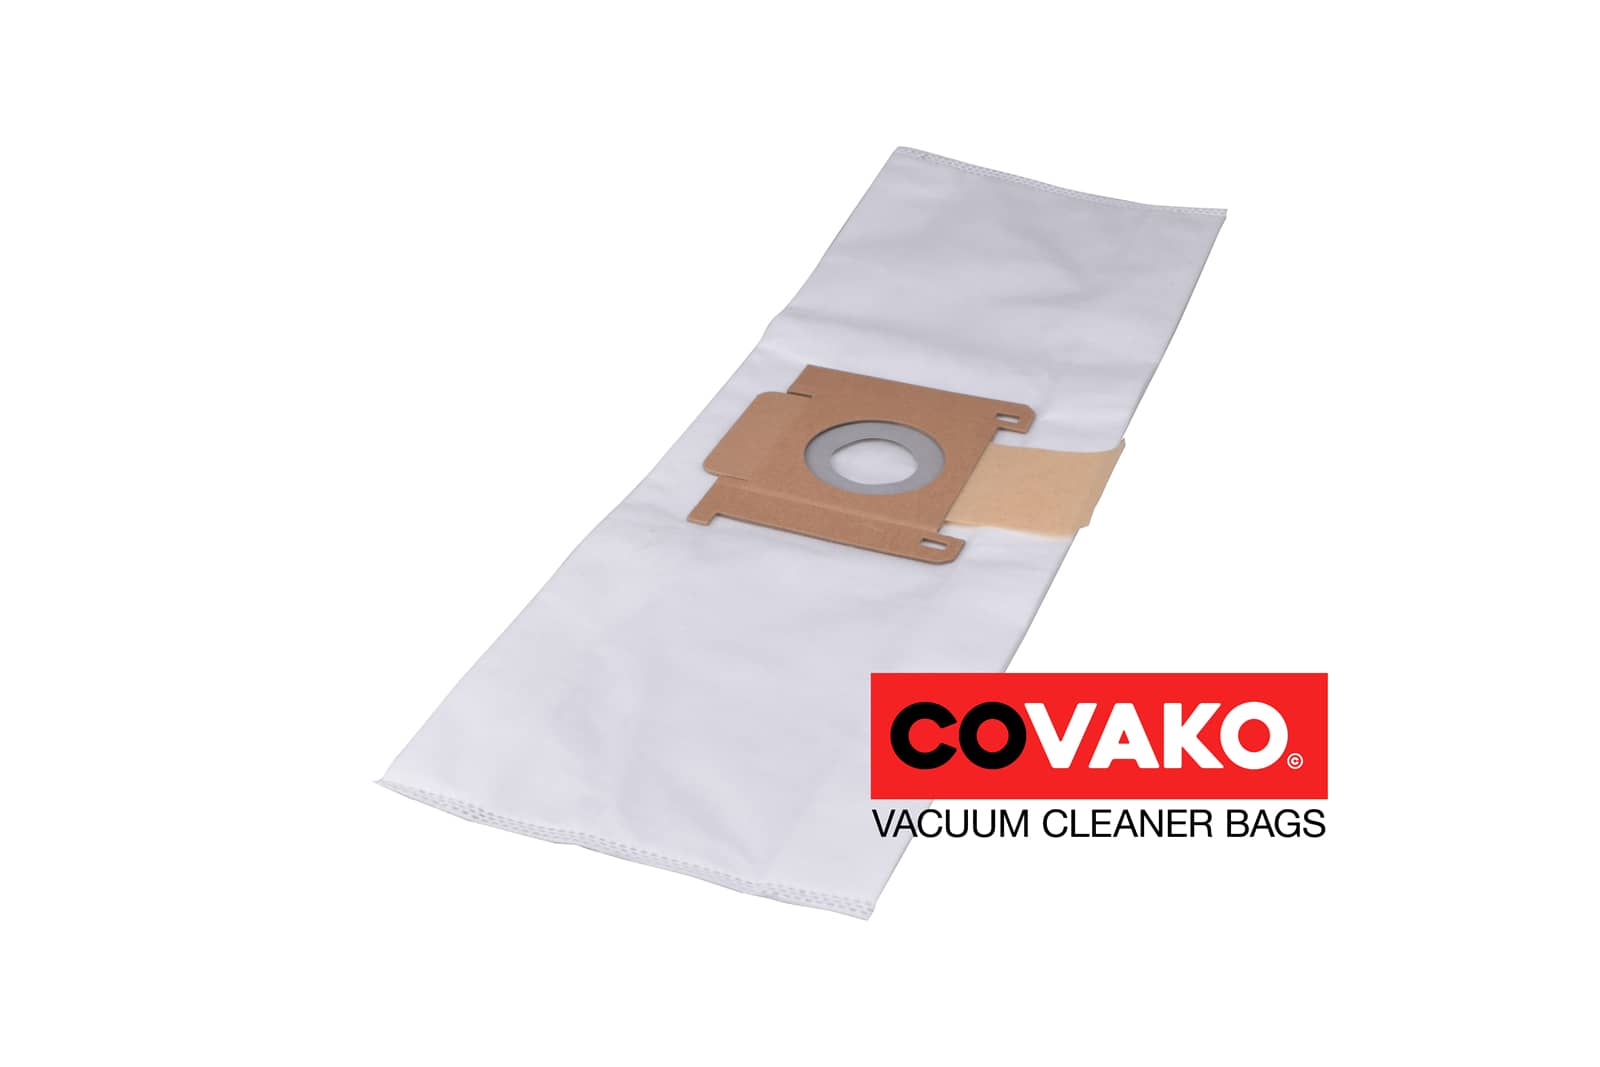 Oehme Otto Steady Extra 6.0 / Synthesis - Oehme Otto vacuum cleaner bags